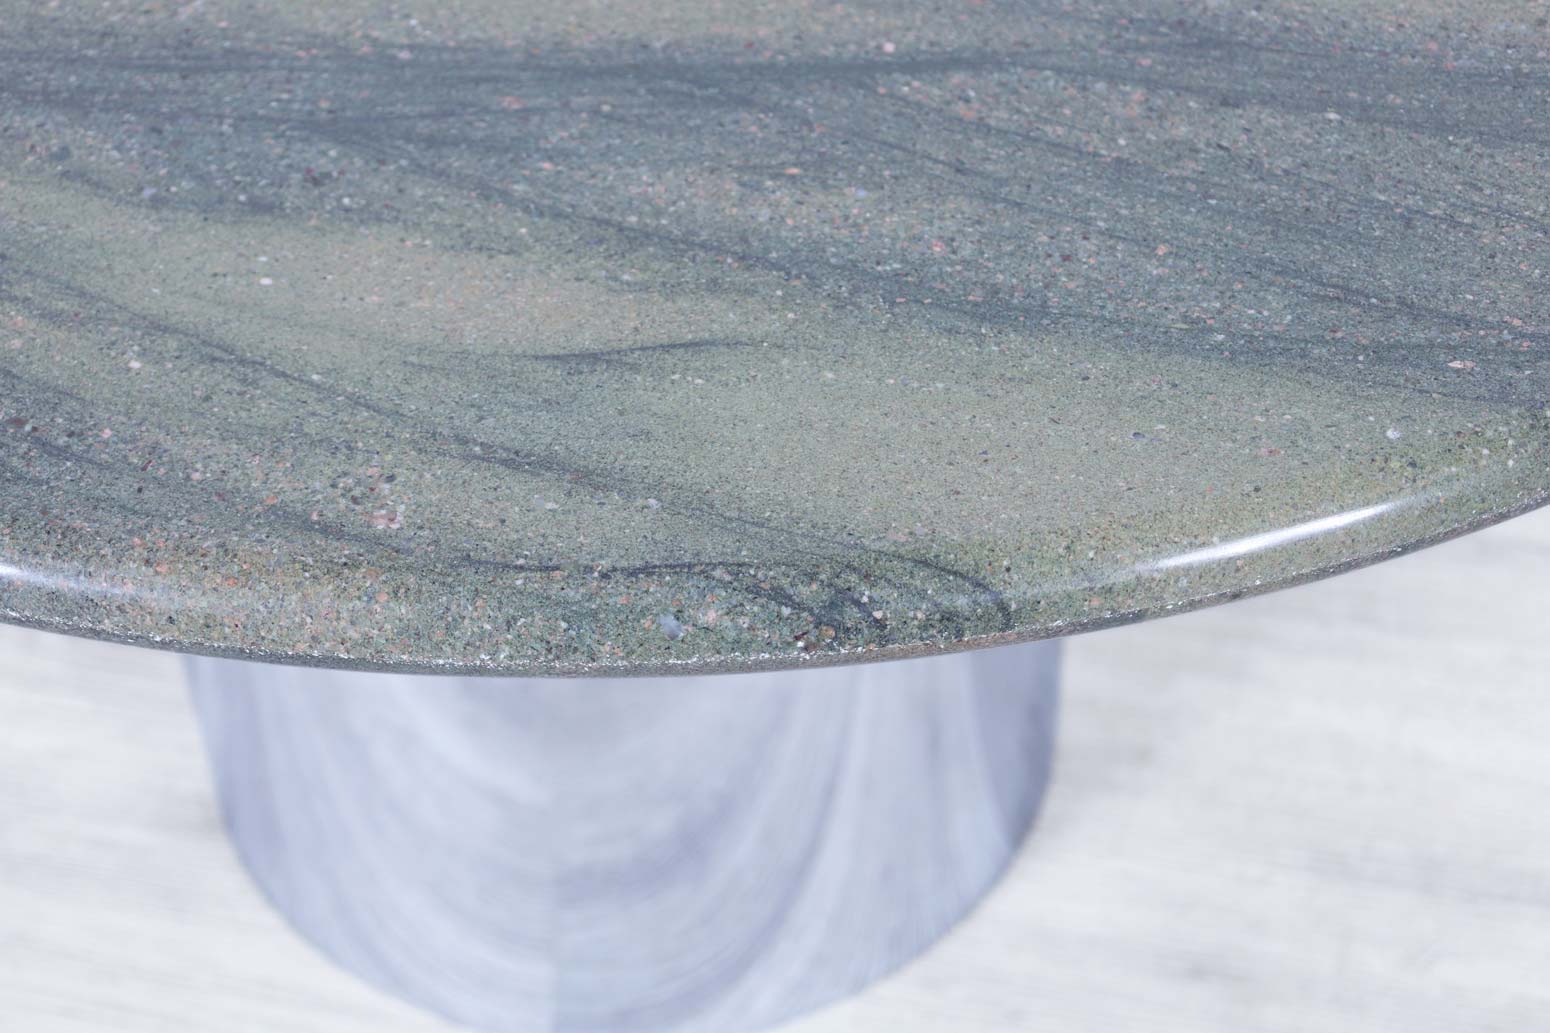 Vintage Marble and Stainless Steel Round Dining Table